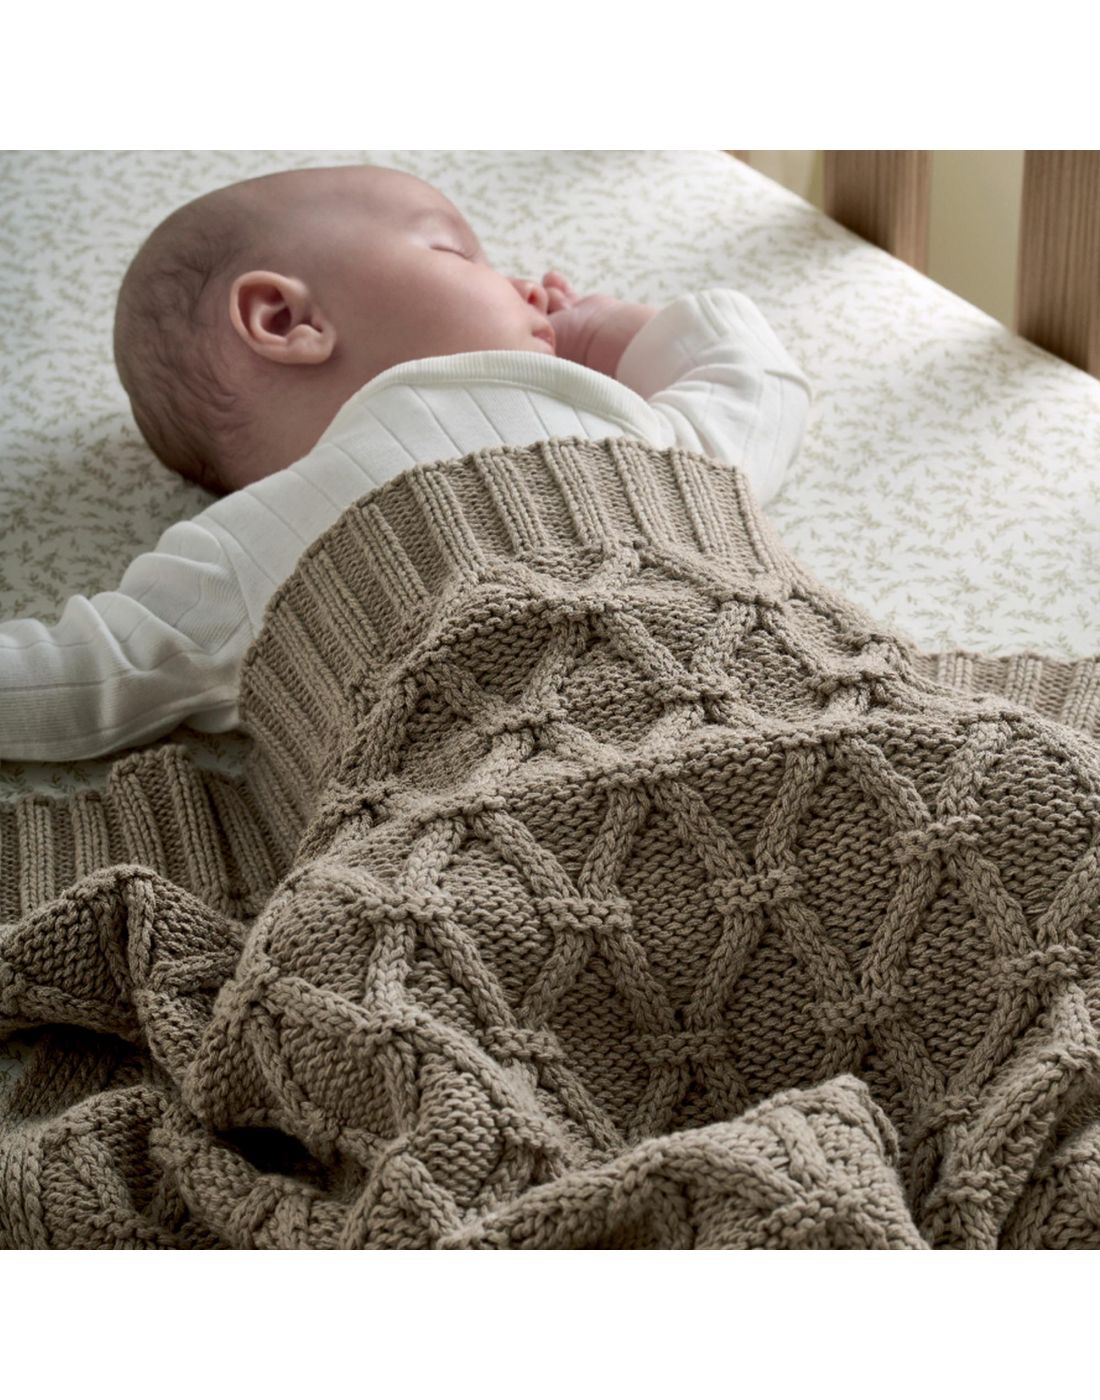 Mamas & Papas Knitted Blanket Welcome to the World Seedling Diamond